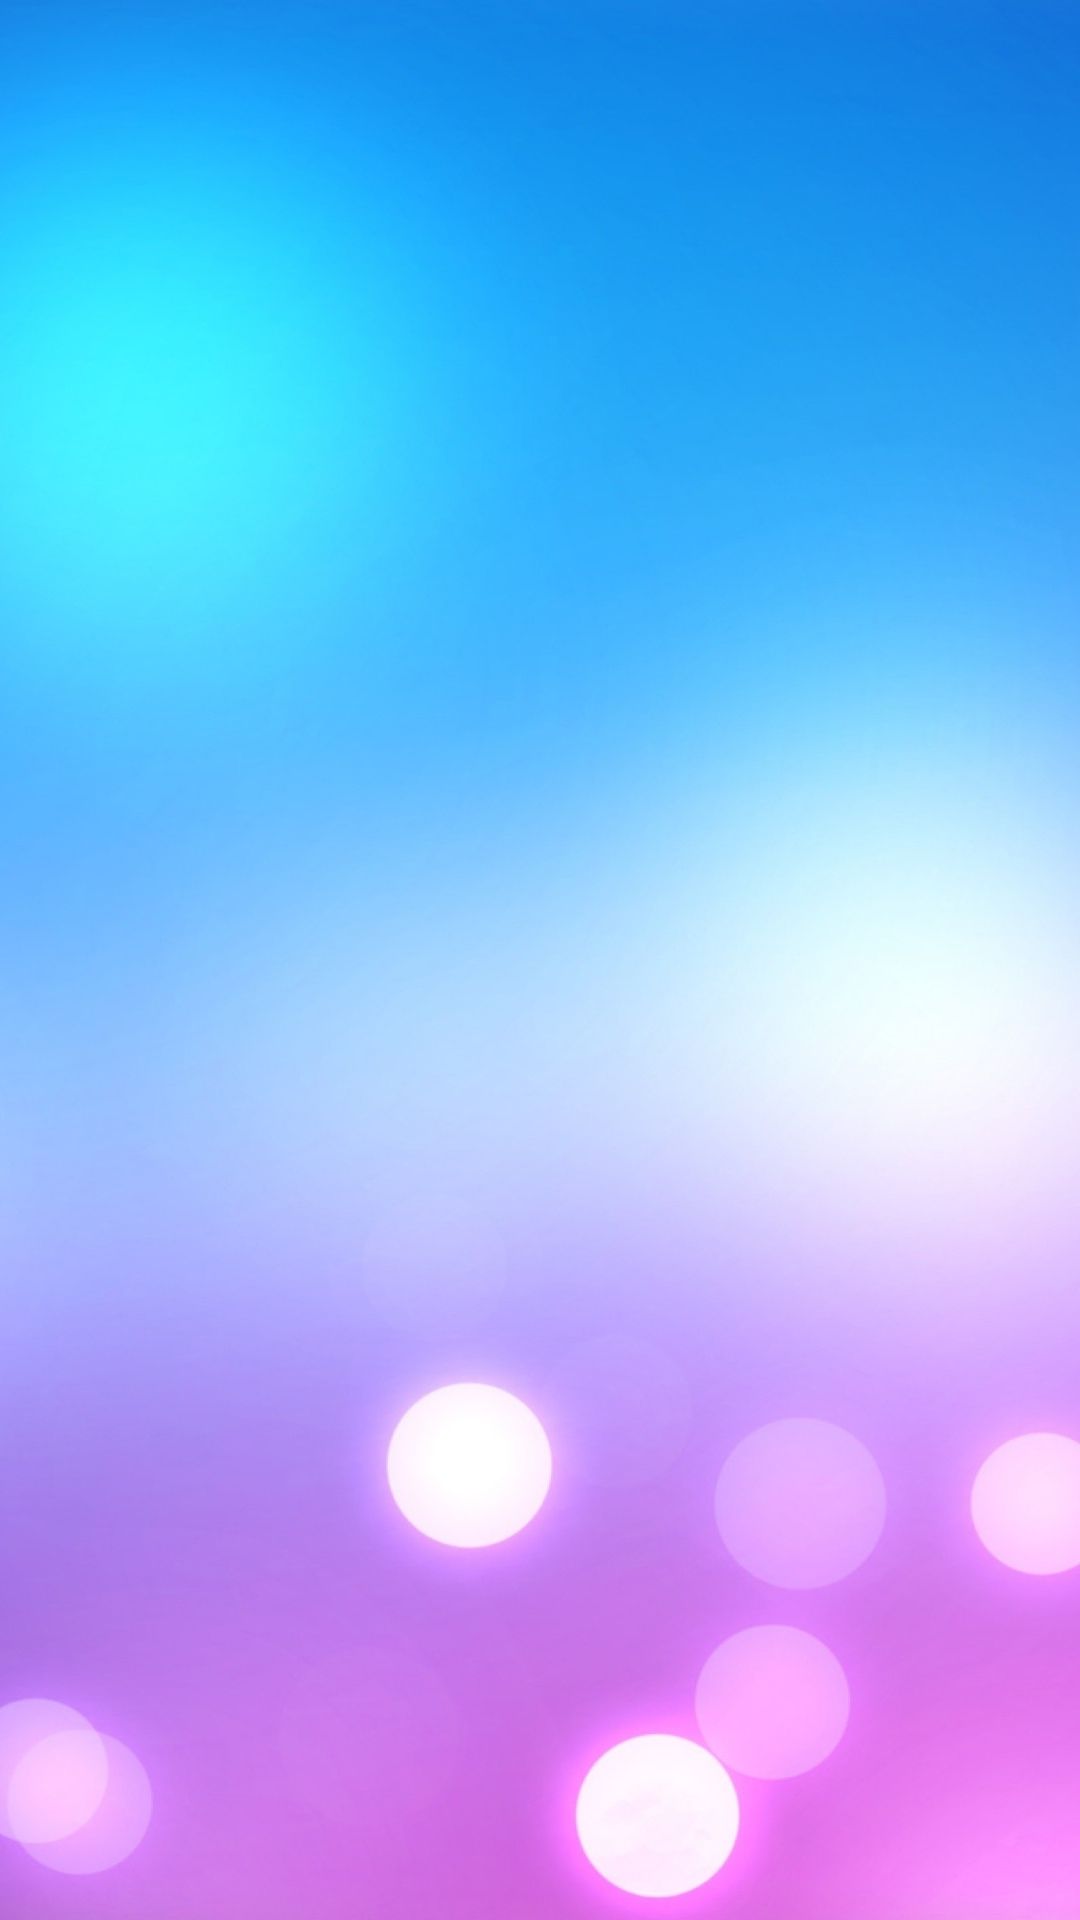 Blue And Pink Wallpaper For Phone - HD Wallpaper 